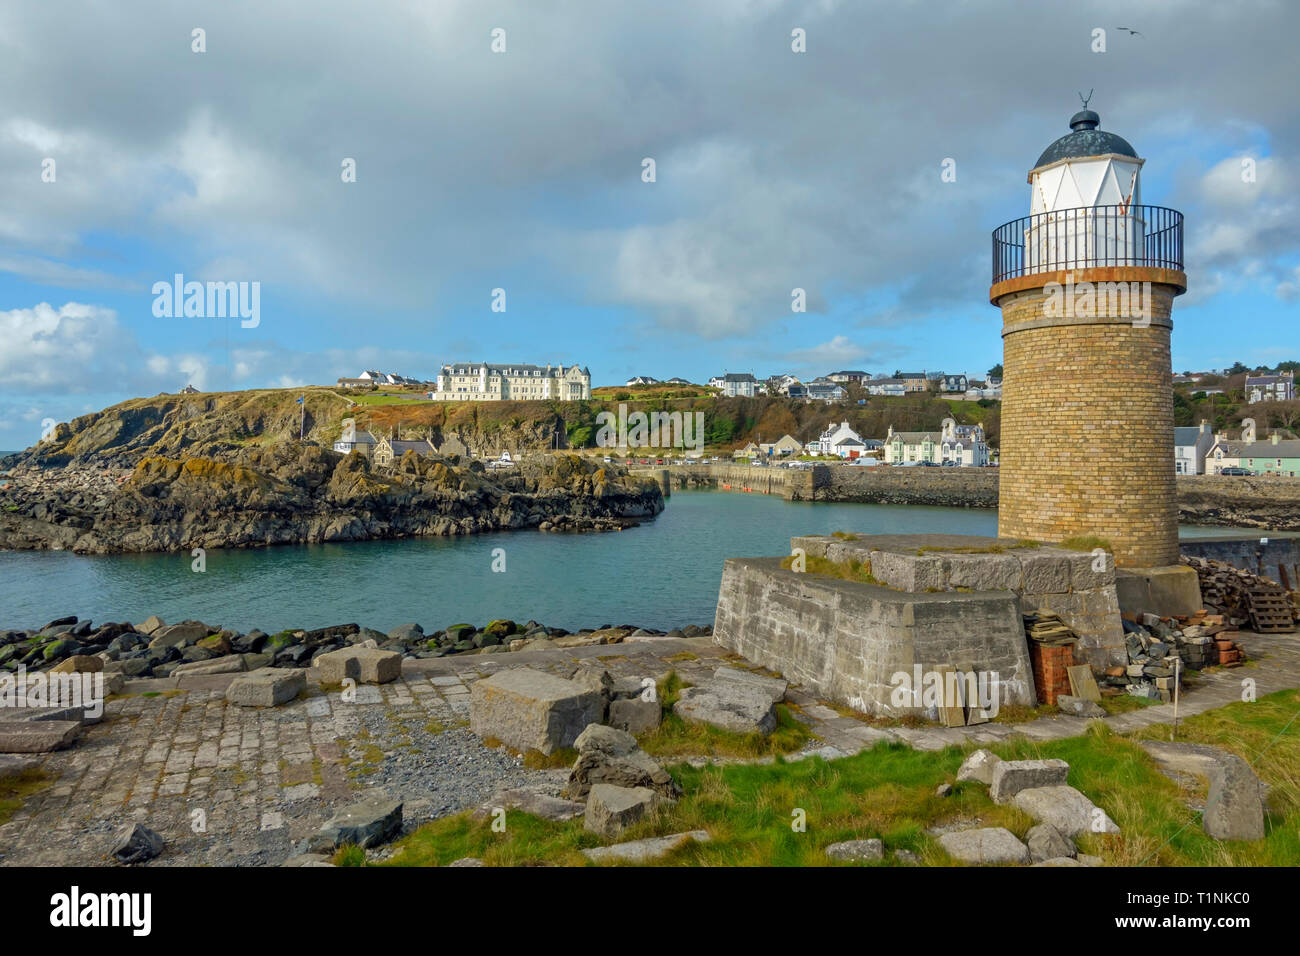 Portpatrick village and harbour in Wigtownshire, Dumfries and Galloway, Scotland. Stock Photo